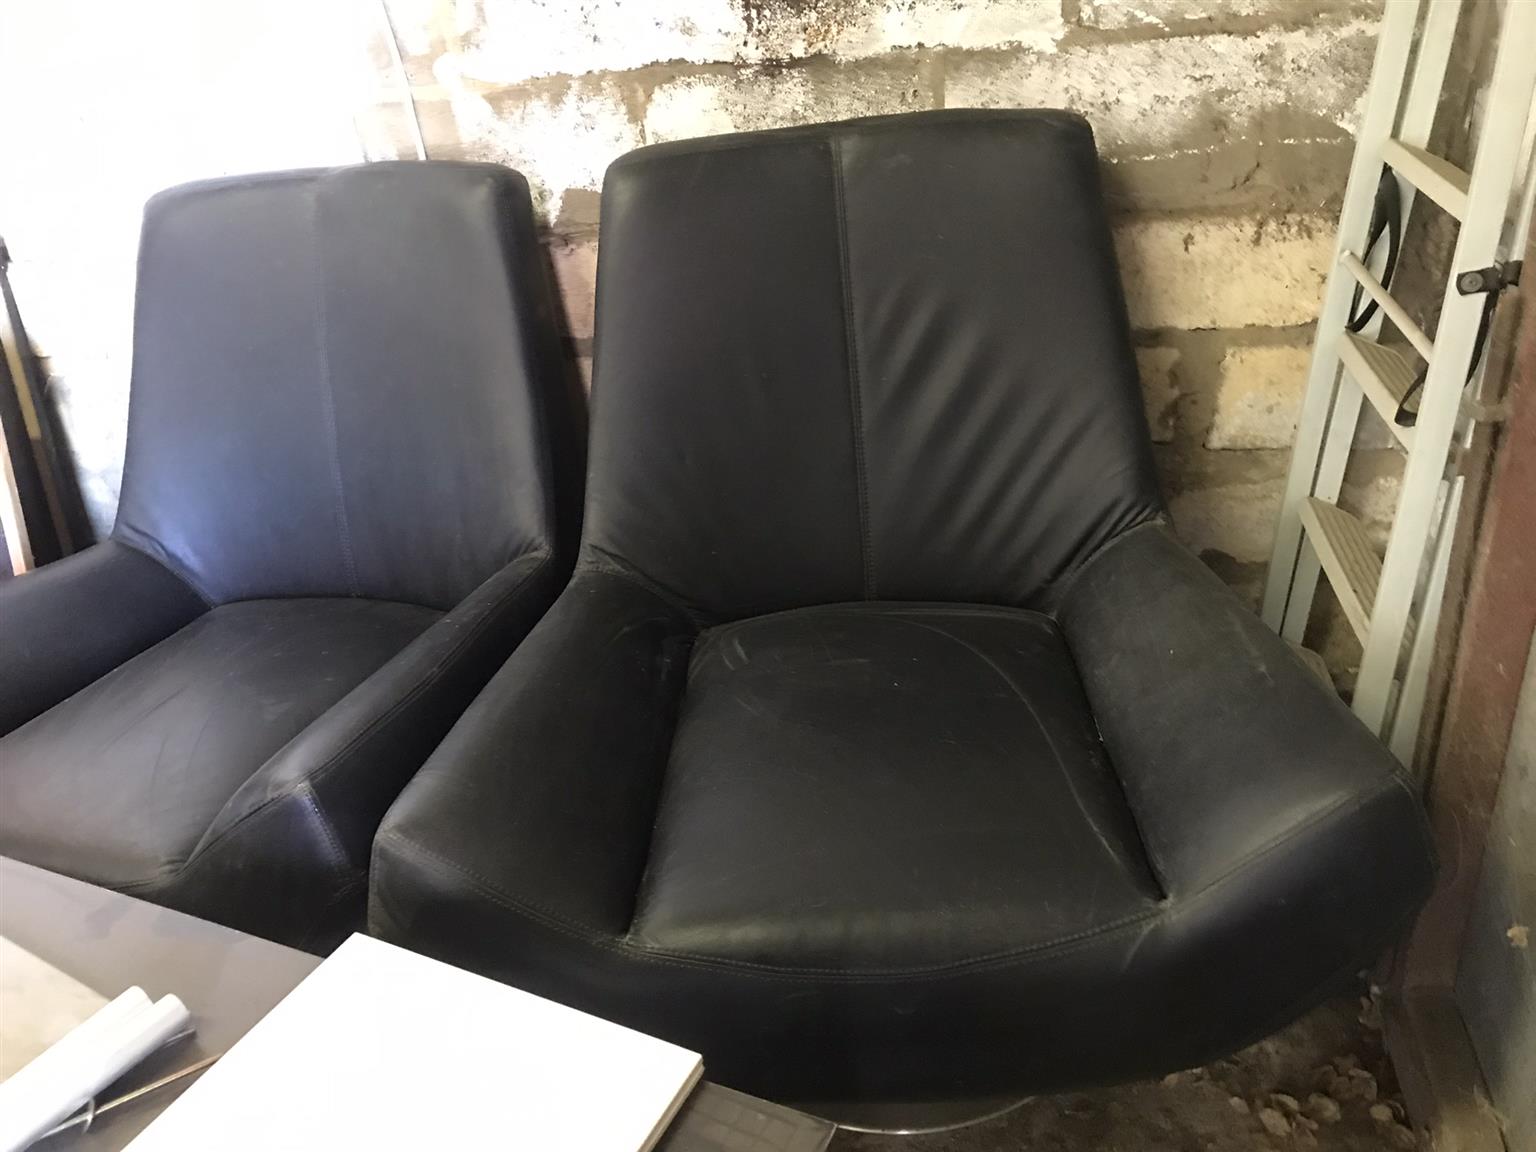 Single seater chairs